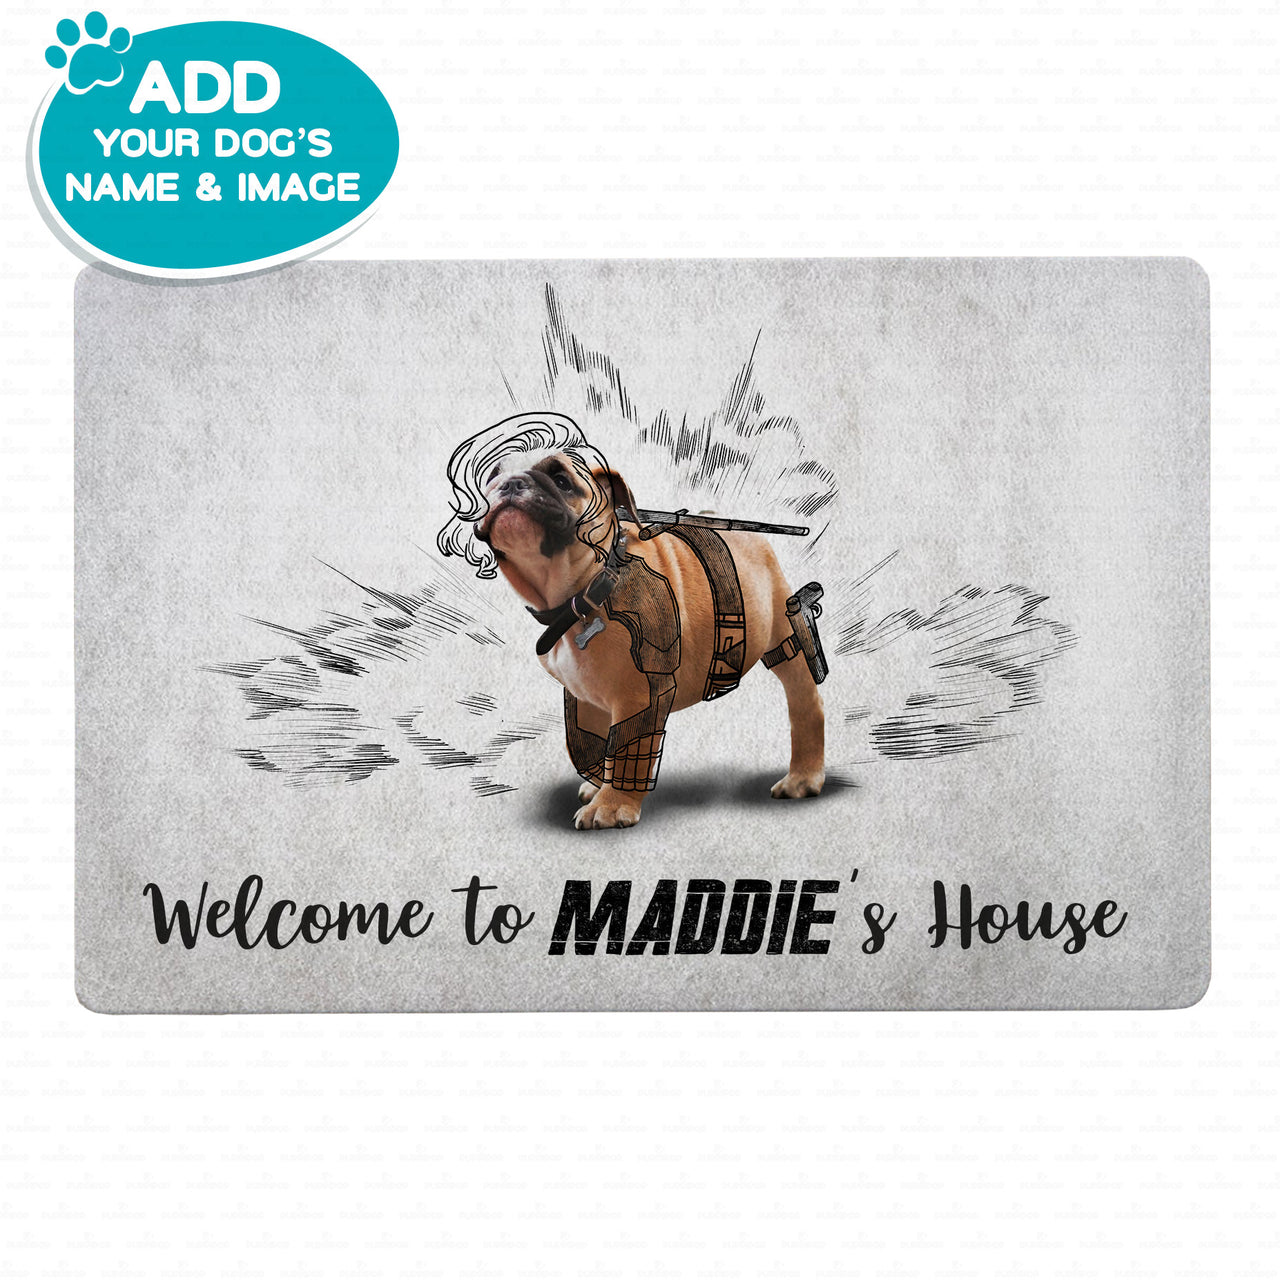 Personalized Dog Gift Idea - Funny Creative Line Art Dog For Dog Lovers - Doormat